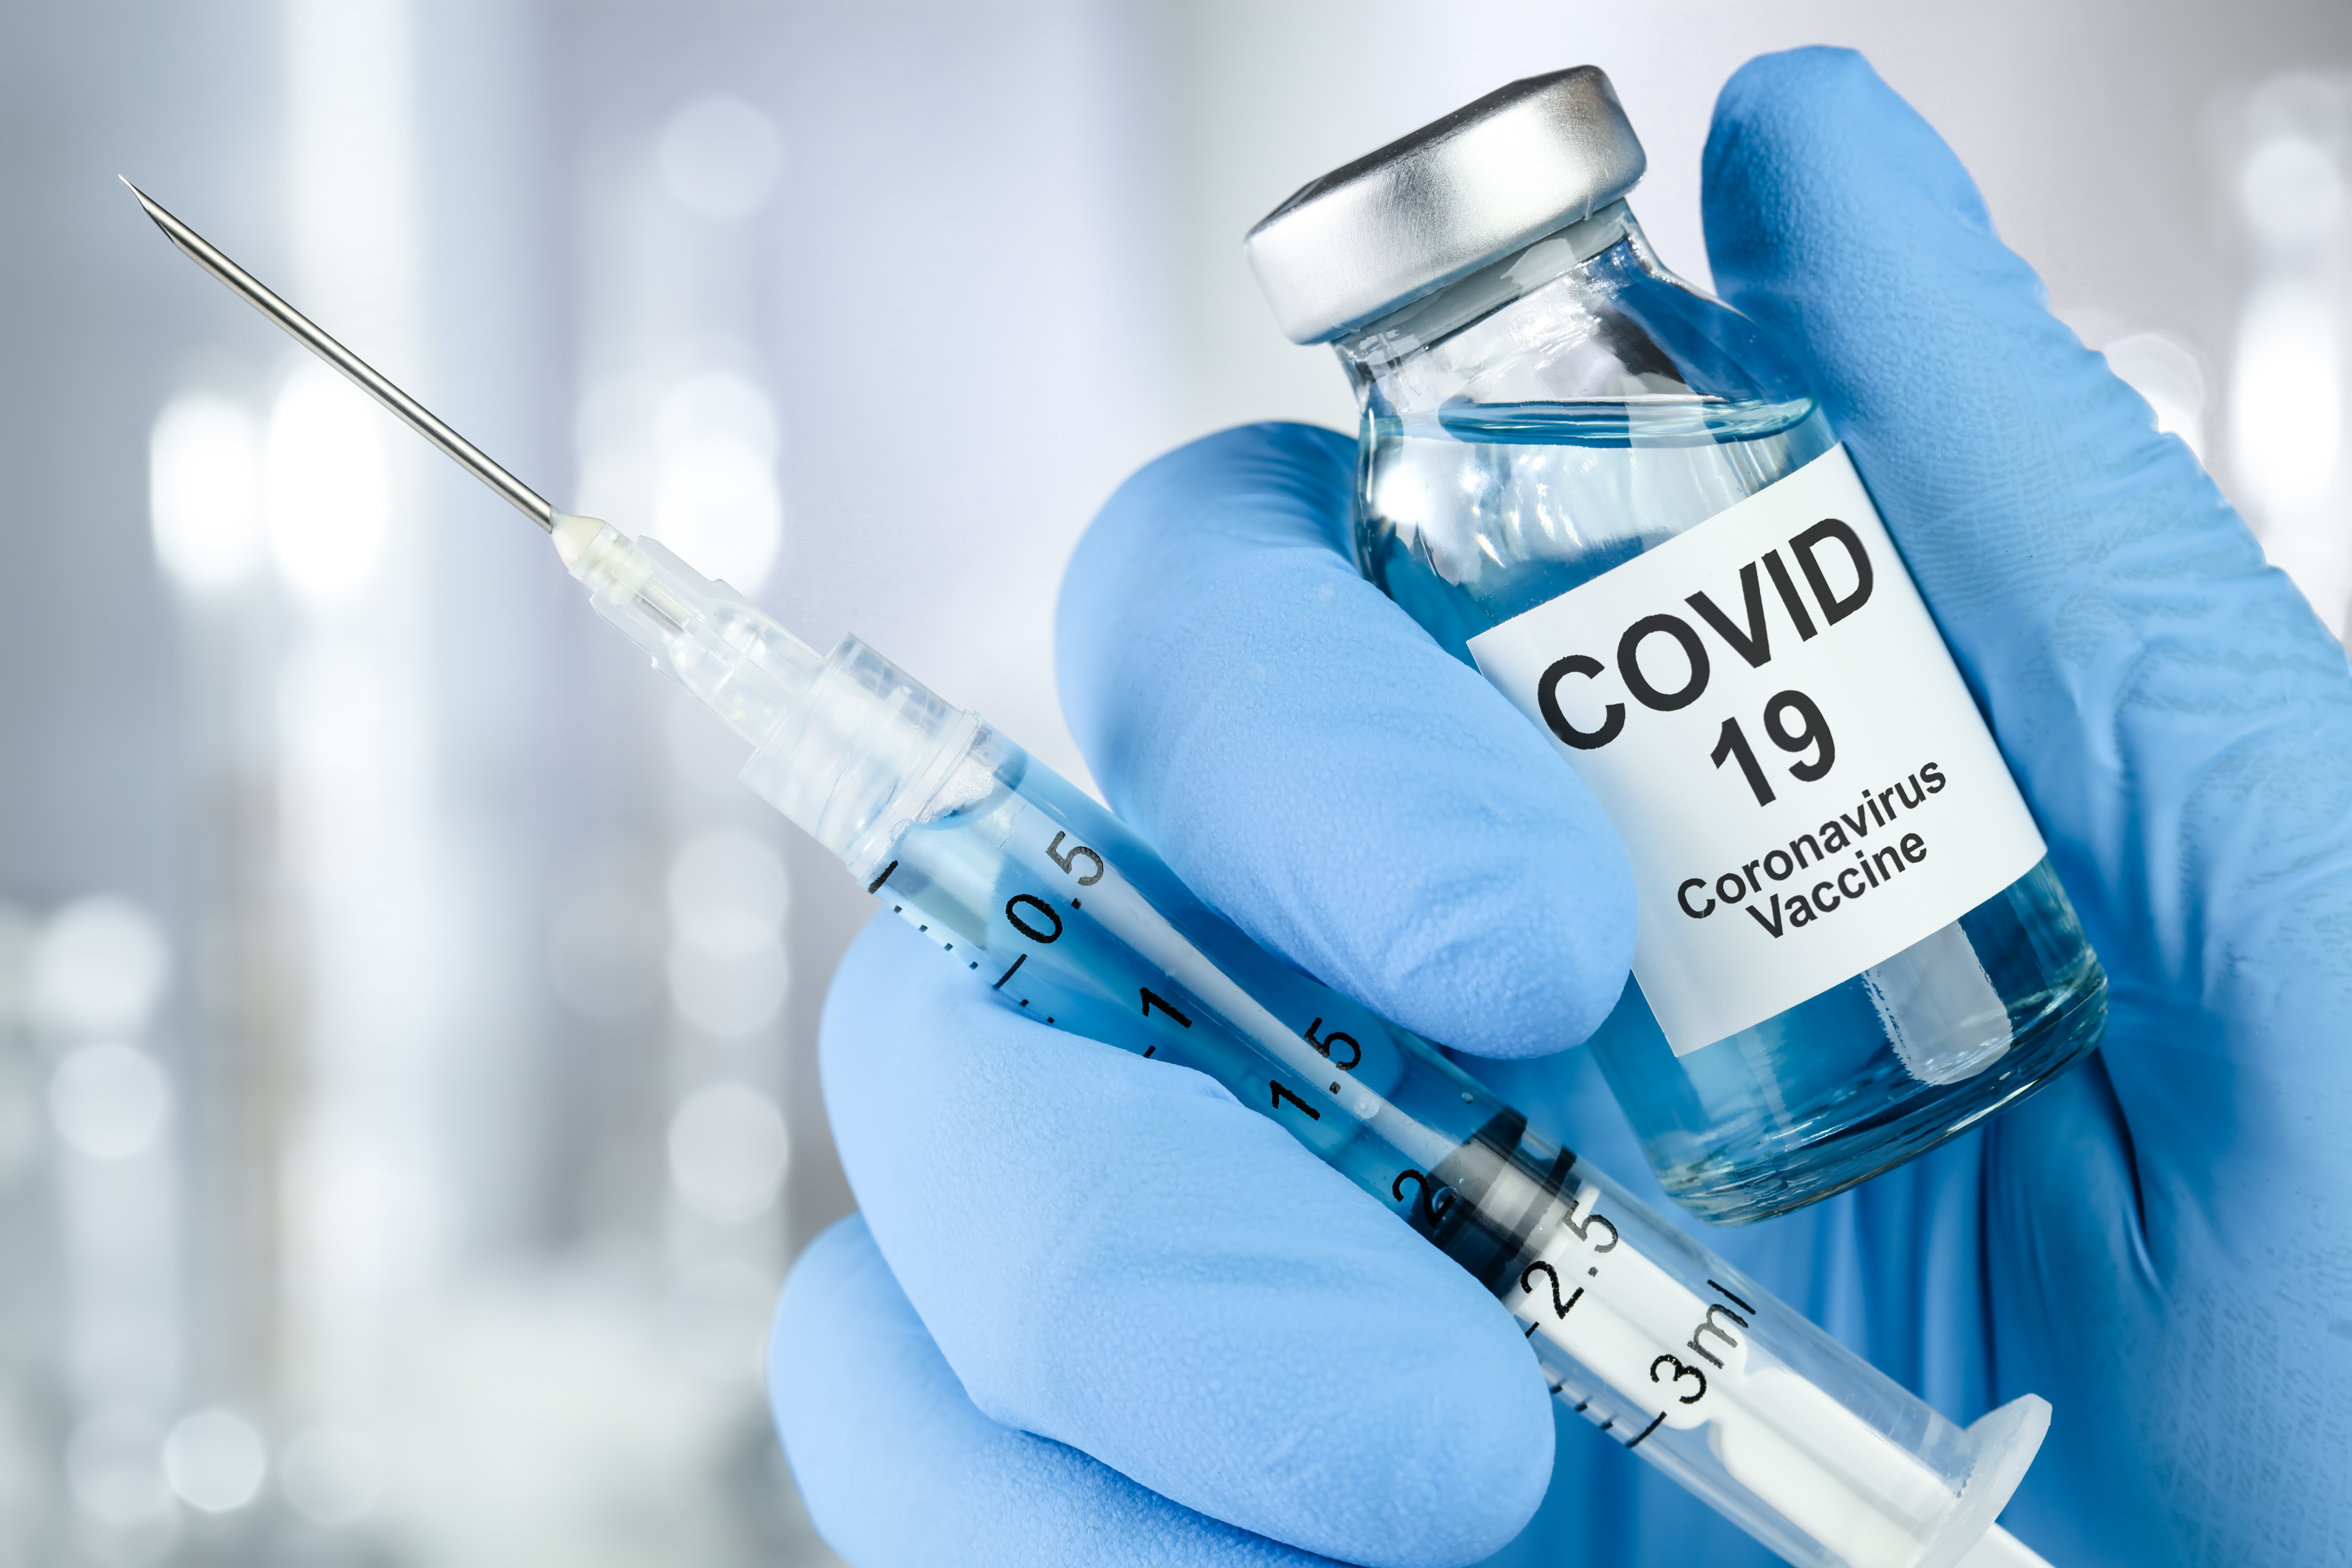 Arm Yourself with a COVID19 Vaccine Detox Kit!